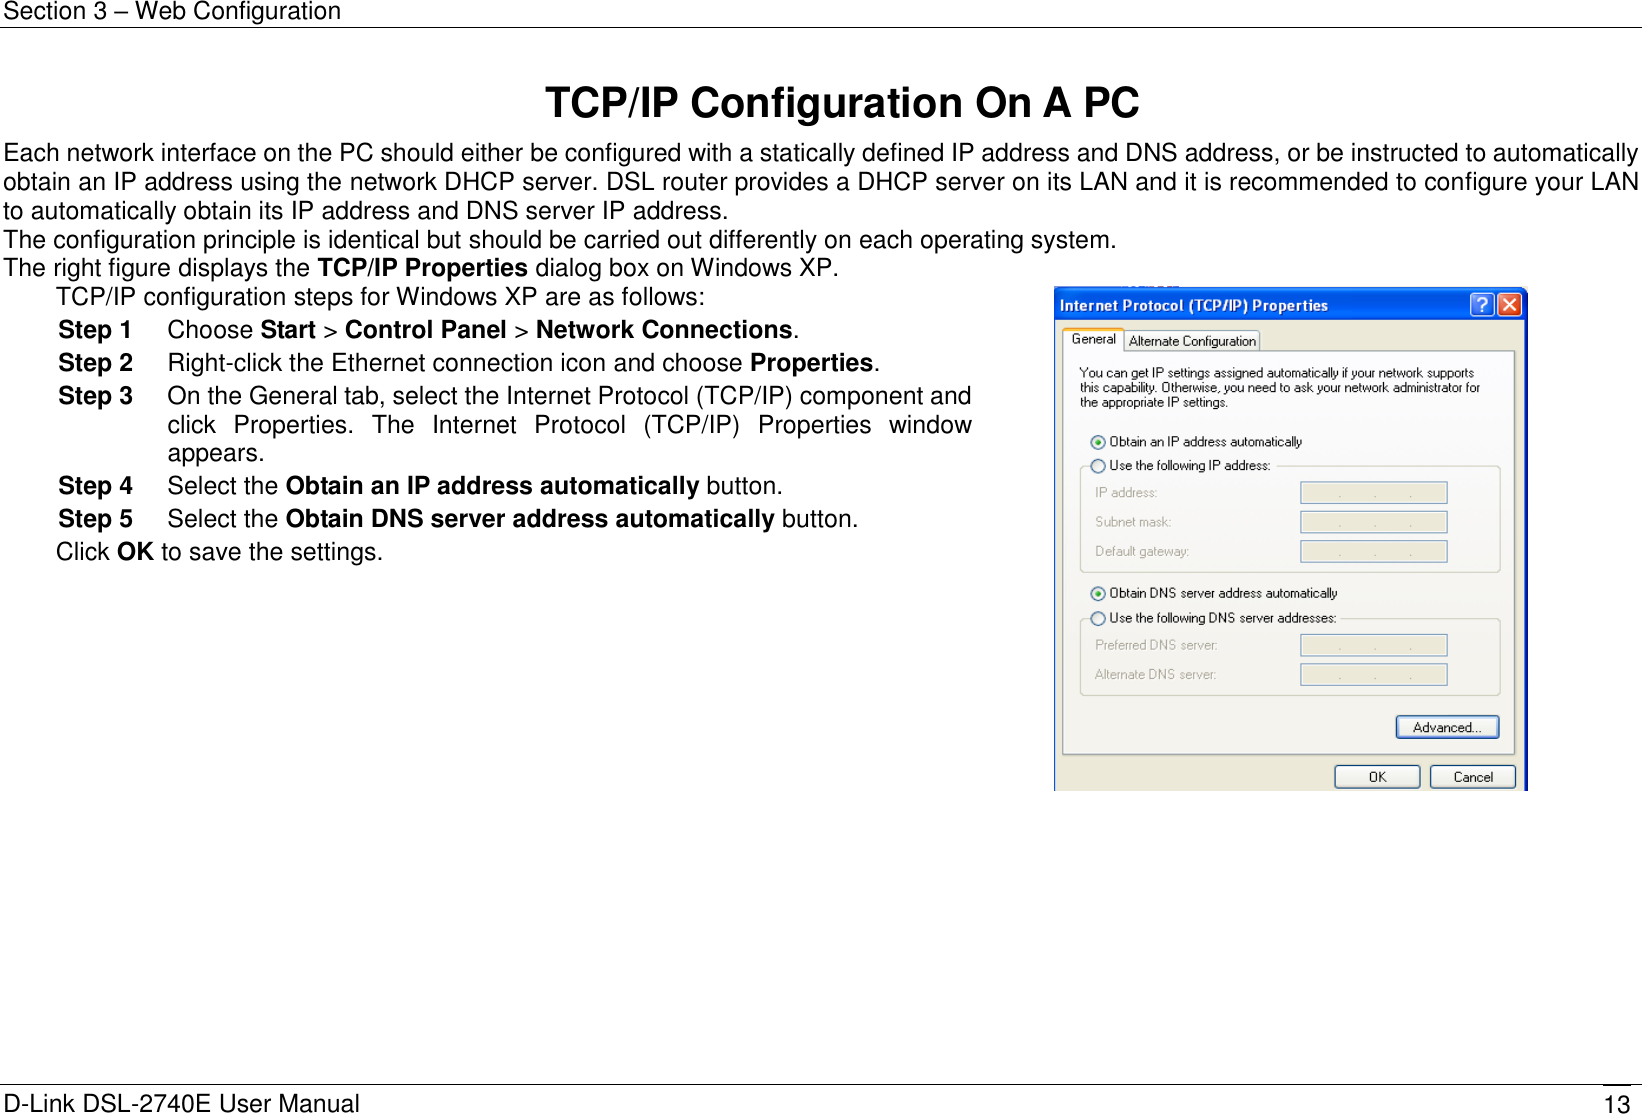 Section 3 – Web Configuration D-Link DSL-2740E User Manual 13 TCP/IP Configuration On A PC Each network interface on the PC should either be configured with a statically defined IP address and DNS address, or be instructed to automatically obtain an IP address using the network DHCP server. DSL router provides a DHCP server on its LAN and it is recommended to configure your LAN to automatically obtain its IP address and DNS server IP address. The configuration principle is identical but should be carried out differently on each operating system. The right figure displays the TCP/IP Properties dialog box on Windows XP. TCP/IP configuration steps for Windows XP are as follows: Step 1  Choose Start &gt; Control Panel &gt; Network Connections. Step 2  Right-click the Ethernet connection icon and choose Properties. Step 3  On the General tab, select the Internet Protocol (TCP/IP) component and click  Properties.  The  Internet  Protocol  (TCP/IP)  Properties  window appears. Step 4  Select the Obtain an IP address automatically button. Step 5  Select the Obtain DNS server address automatically button. Click OK to save the settings.  